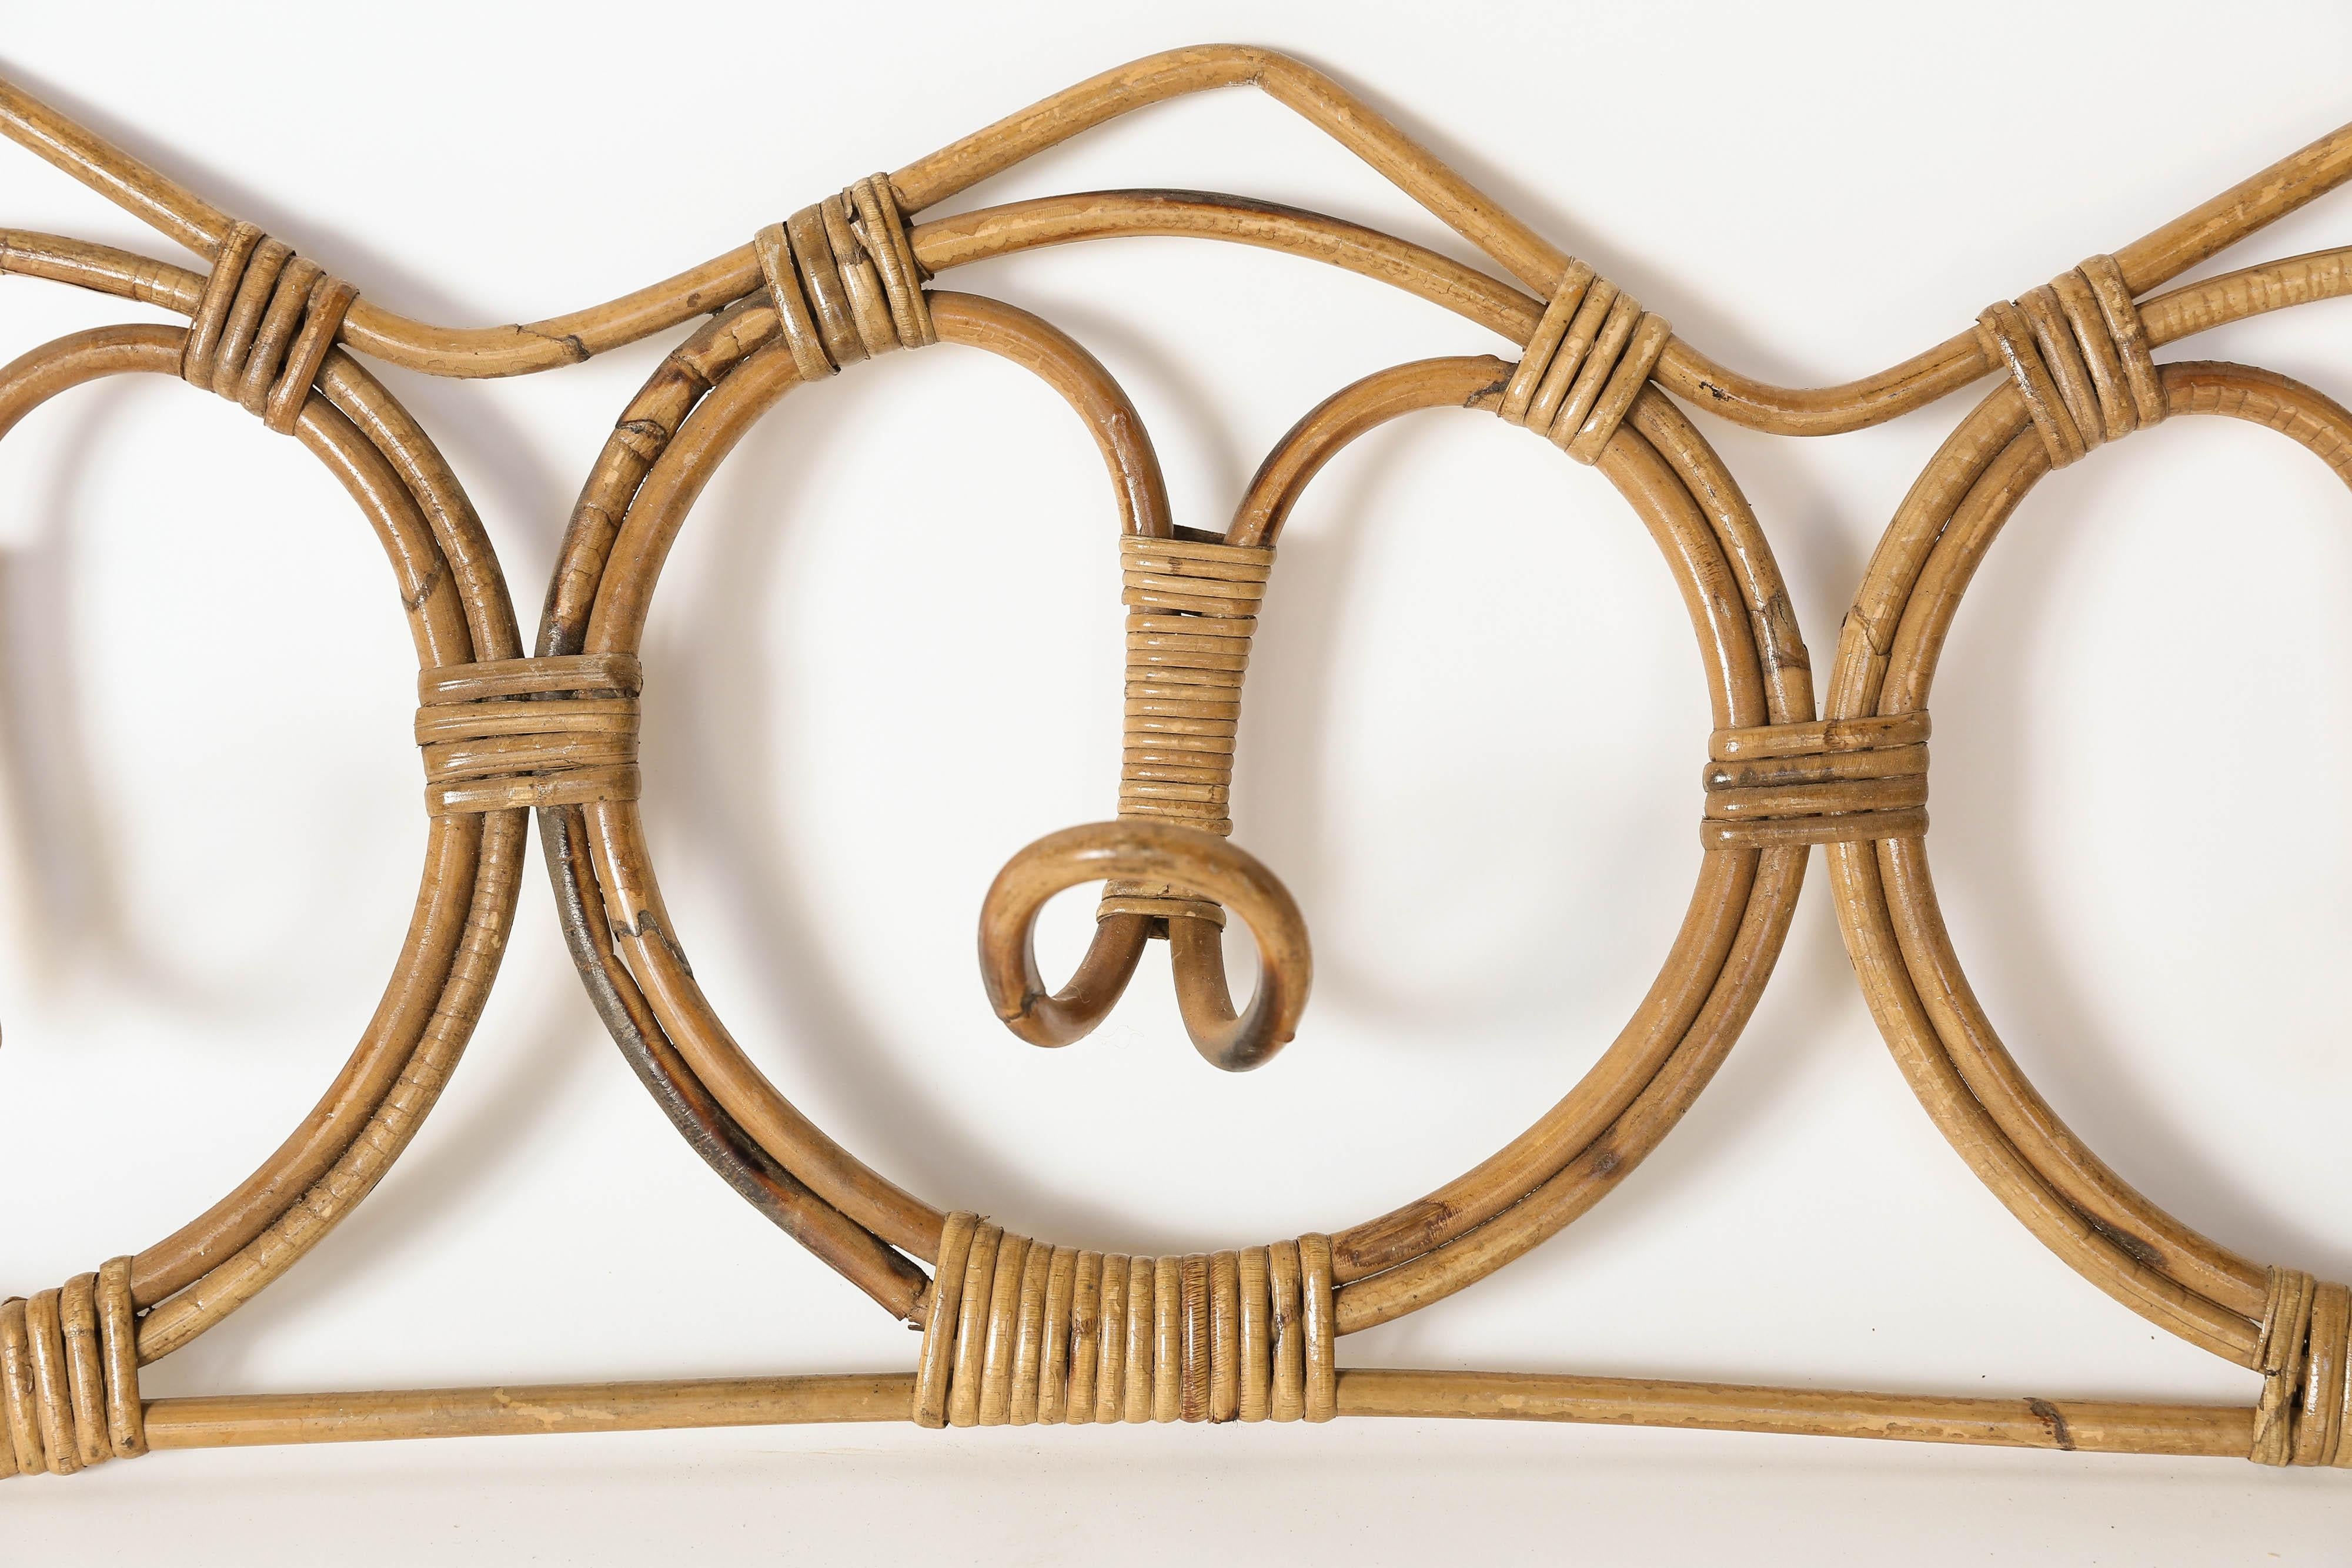 This vintage rattan coat hanger, found in France, is both stylish and functional with three hooks to hold coats and hats. It would be a wonderful addition to the beach or mid century style home.